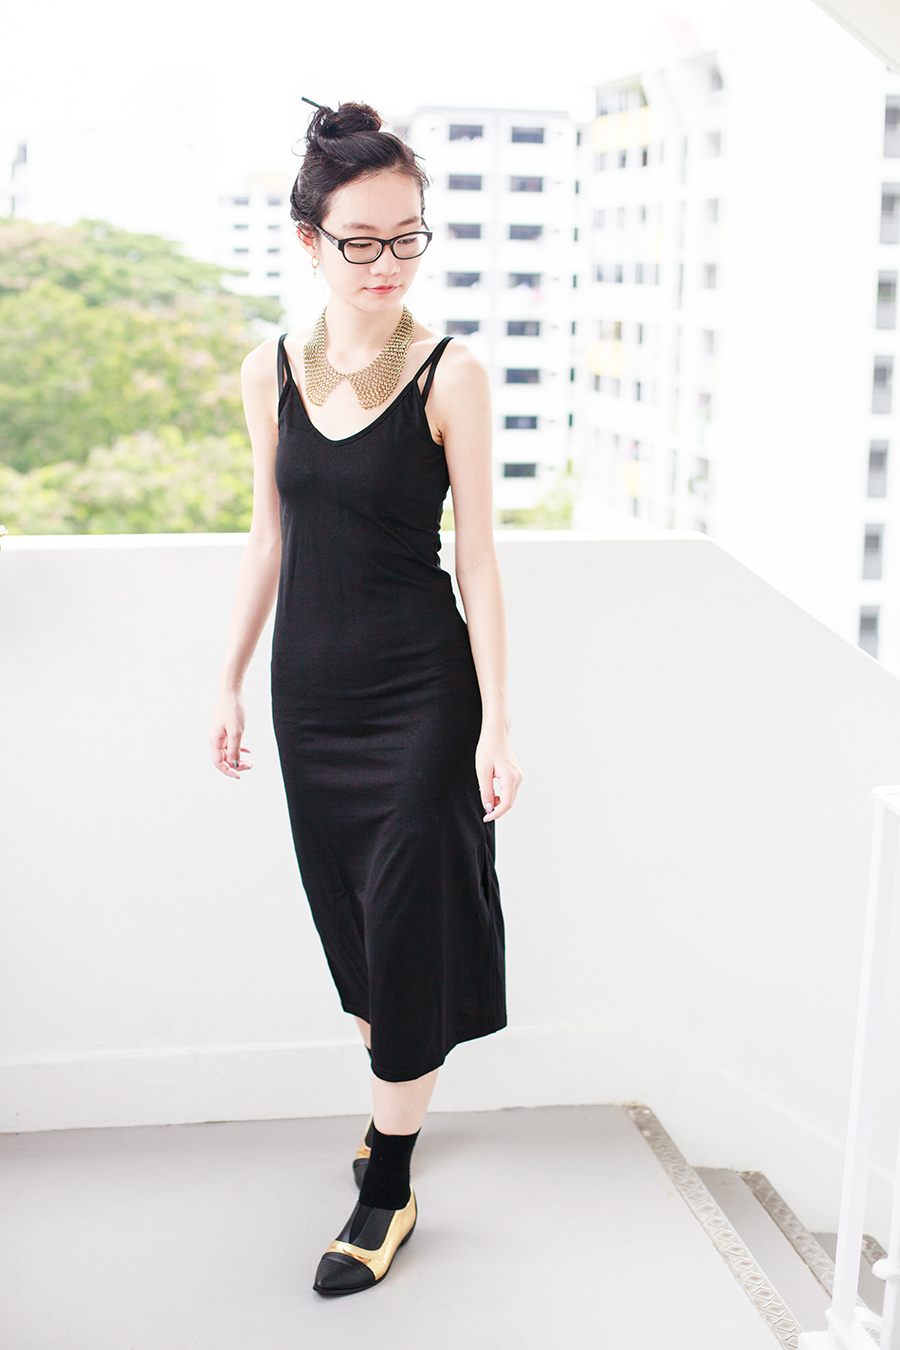 Day to night outfit: Newdress v-neck strappy black dress, Forever 21 gold chain collar necklace, Gap black frame glasses, Taobao black crew socks, Something Borrowed Dual-Toned black and gold Pointed Flats via Zalora.